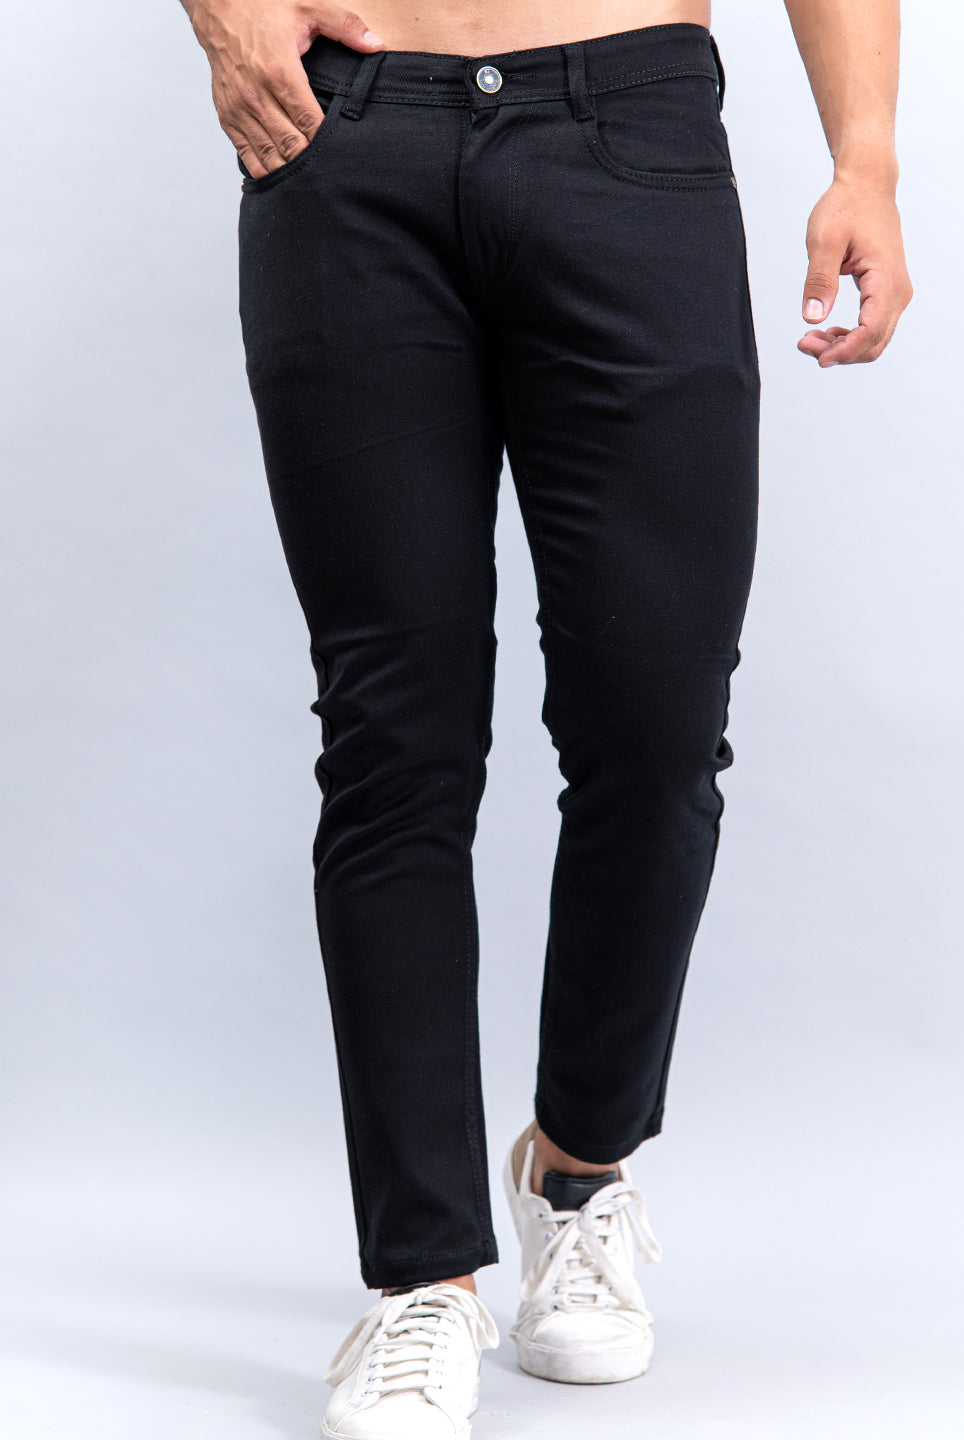 solid black knitted jeans